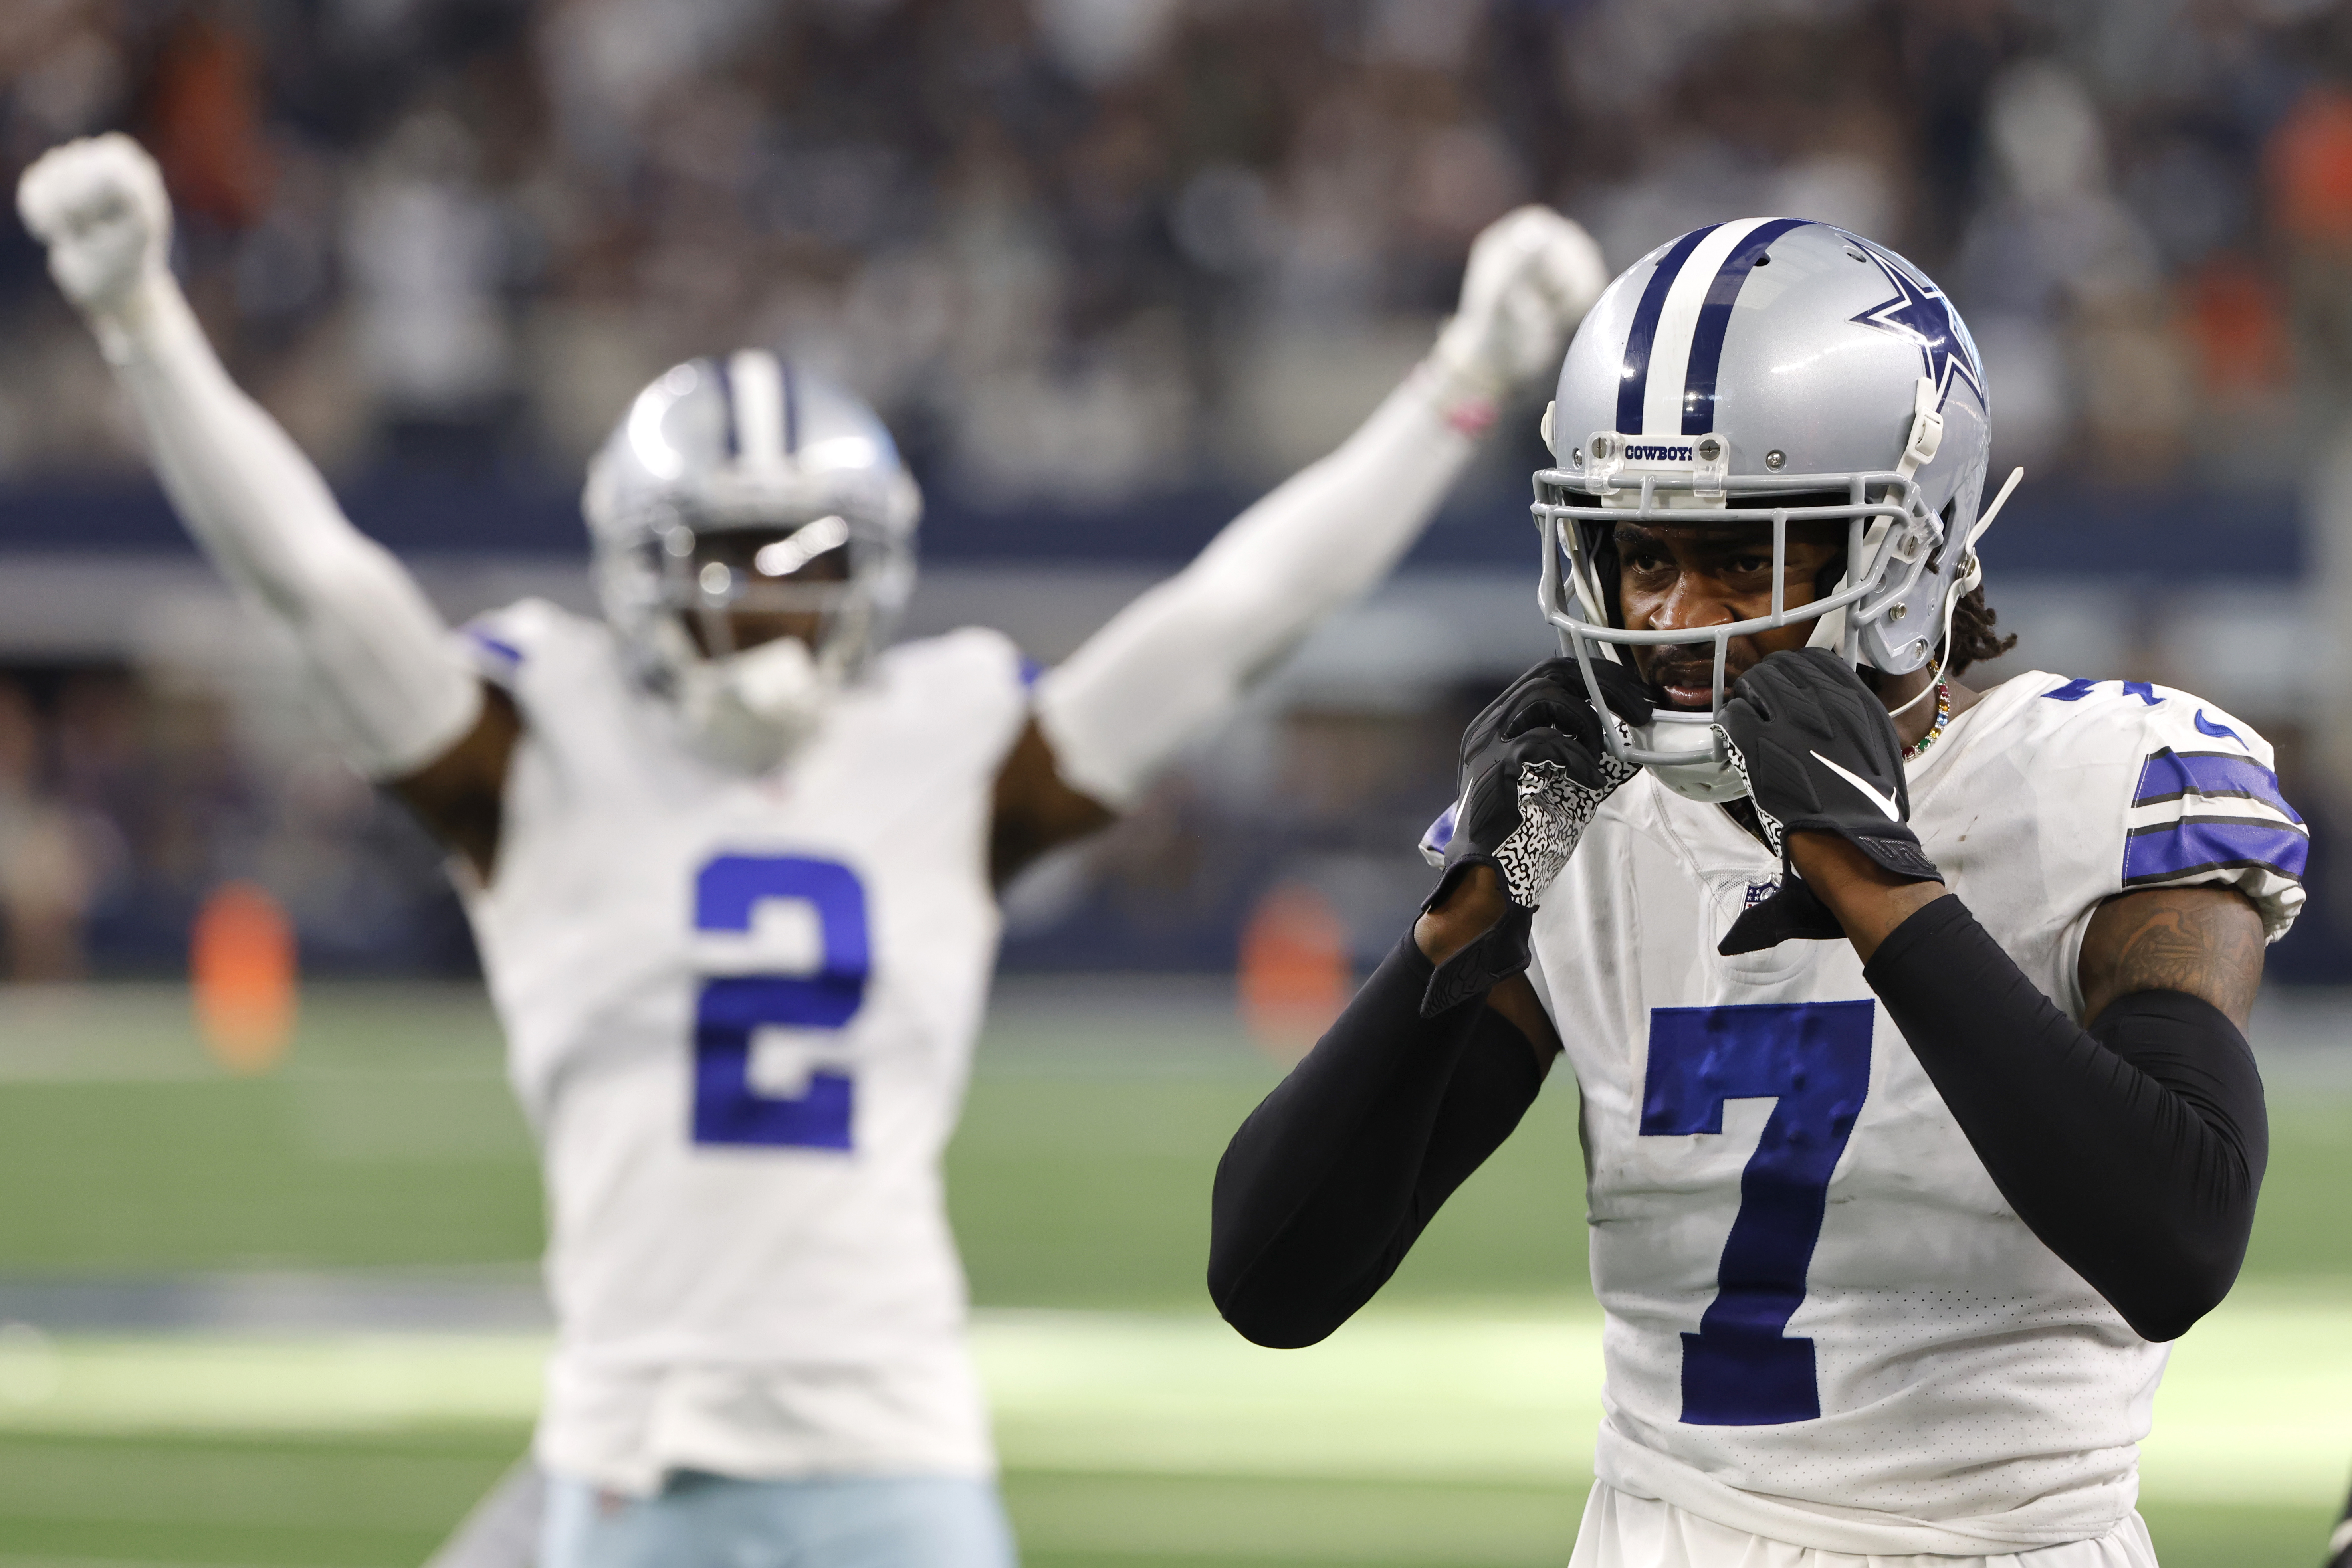 Get it done': Trevon Diggs set up Cowboys game-winning drive